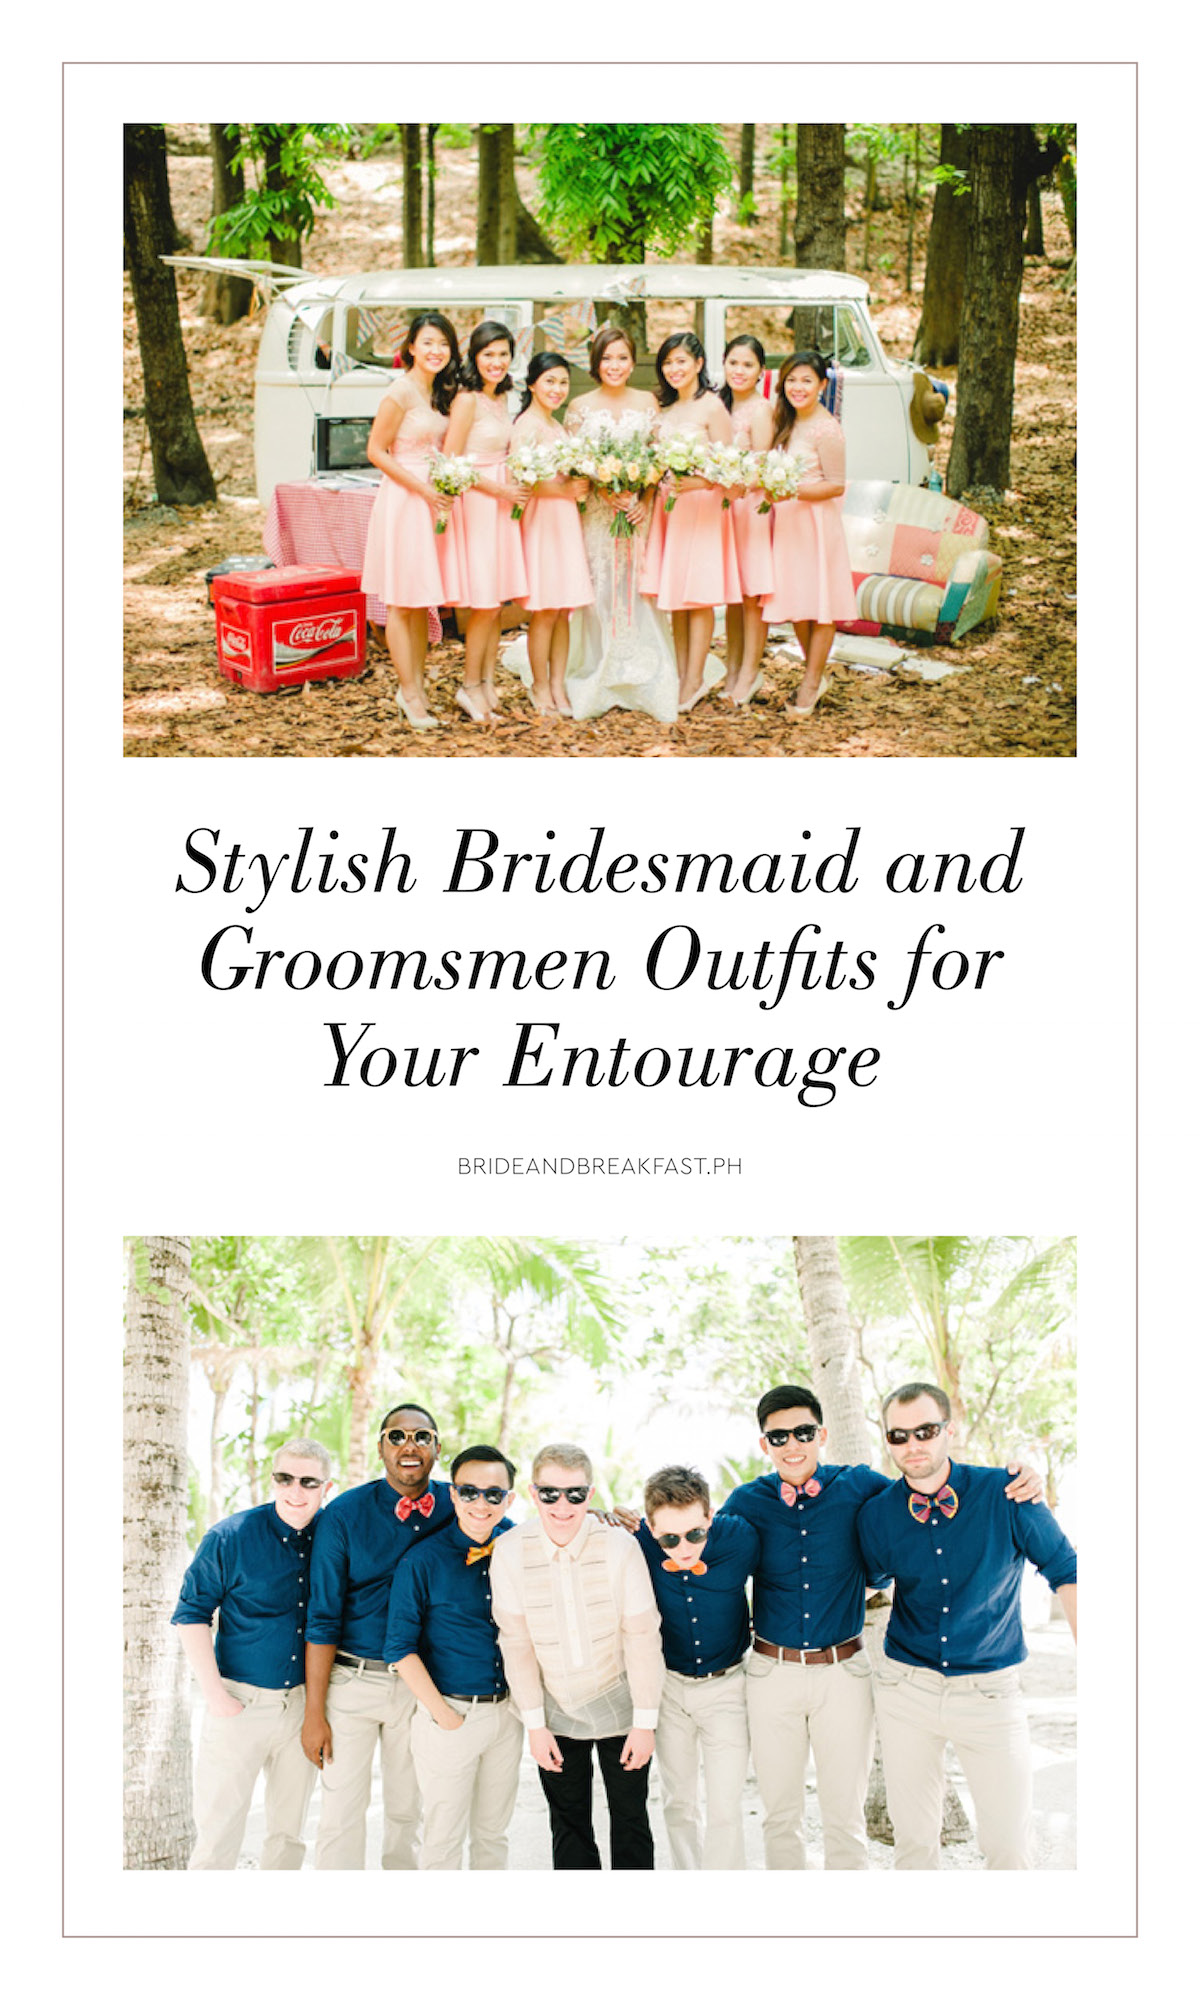 Stylish Bridesmaid and Groomsmen Outfits for Your Entourage